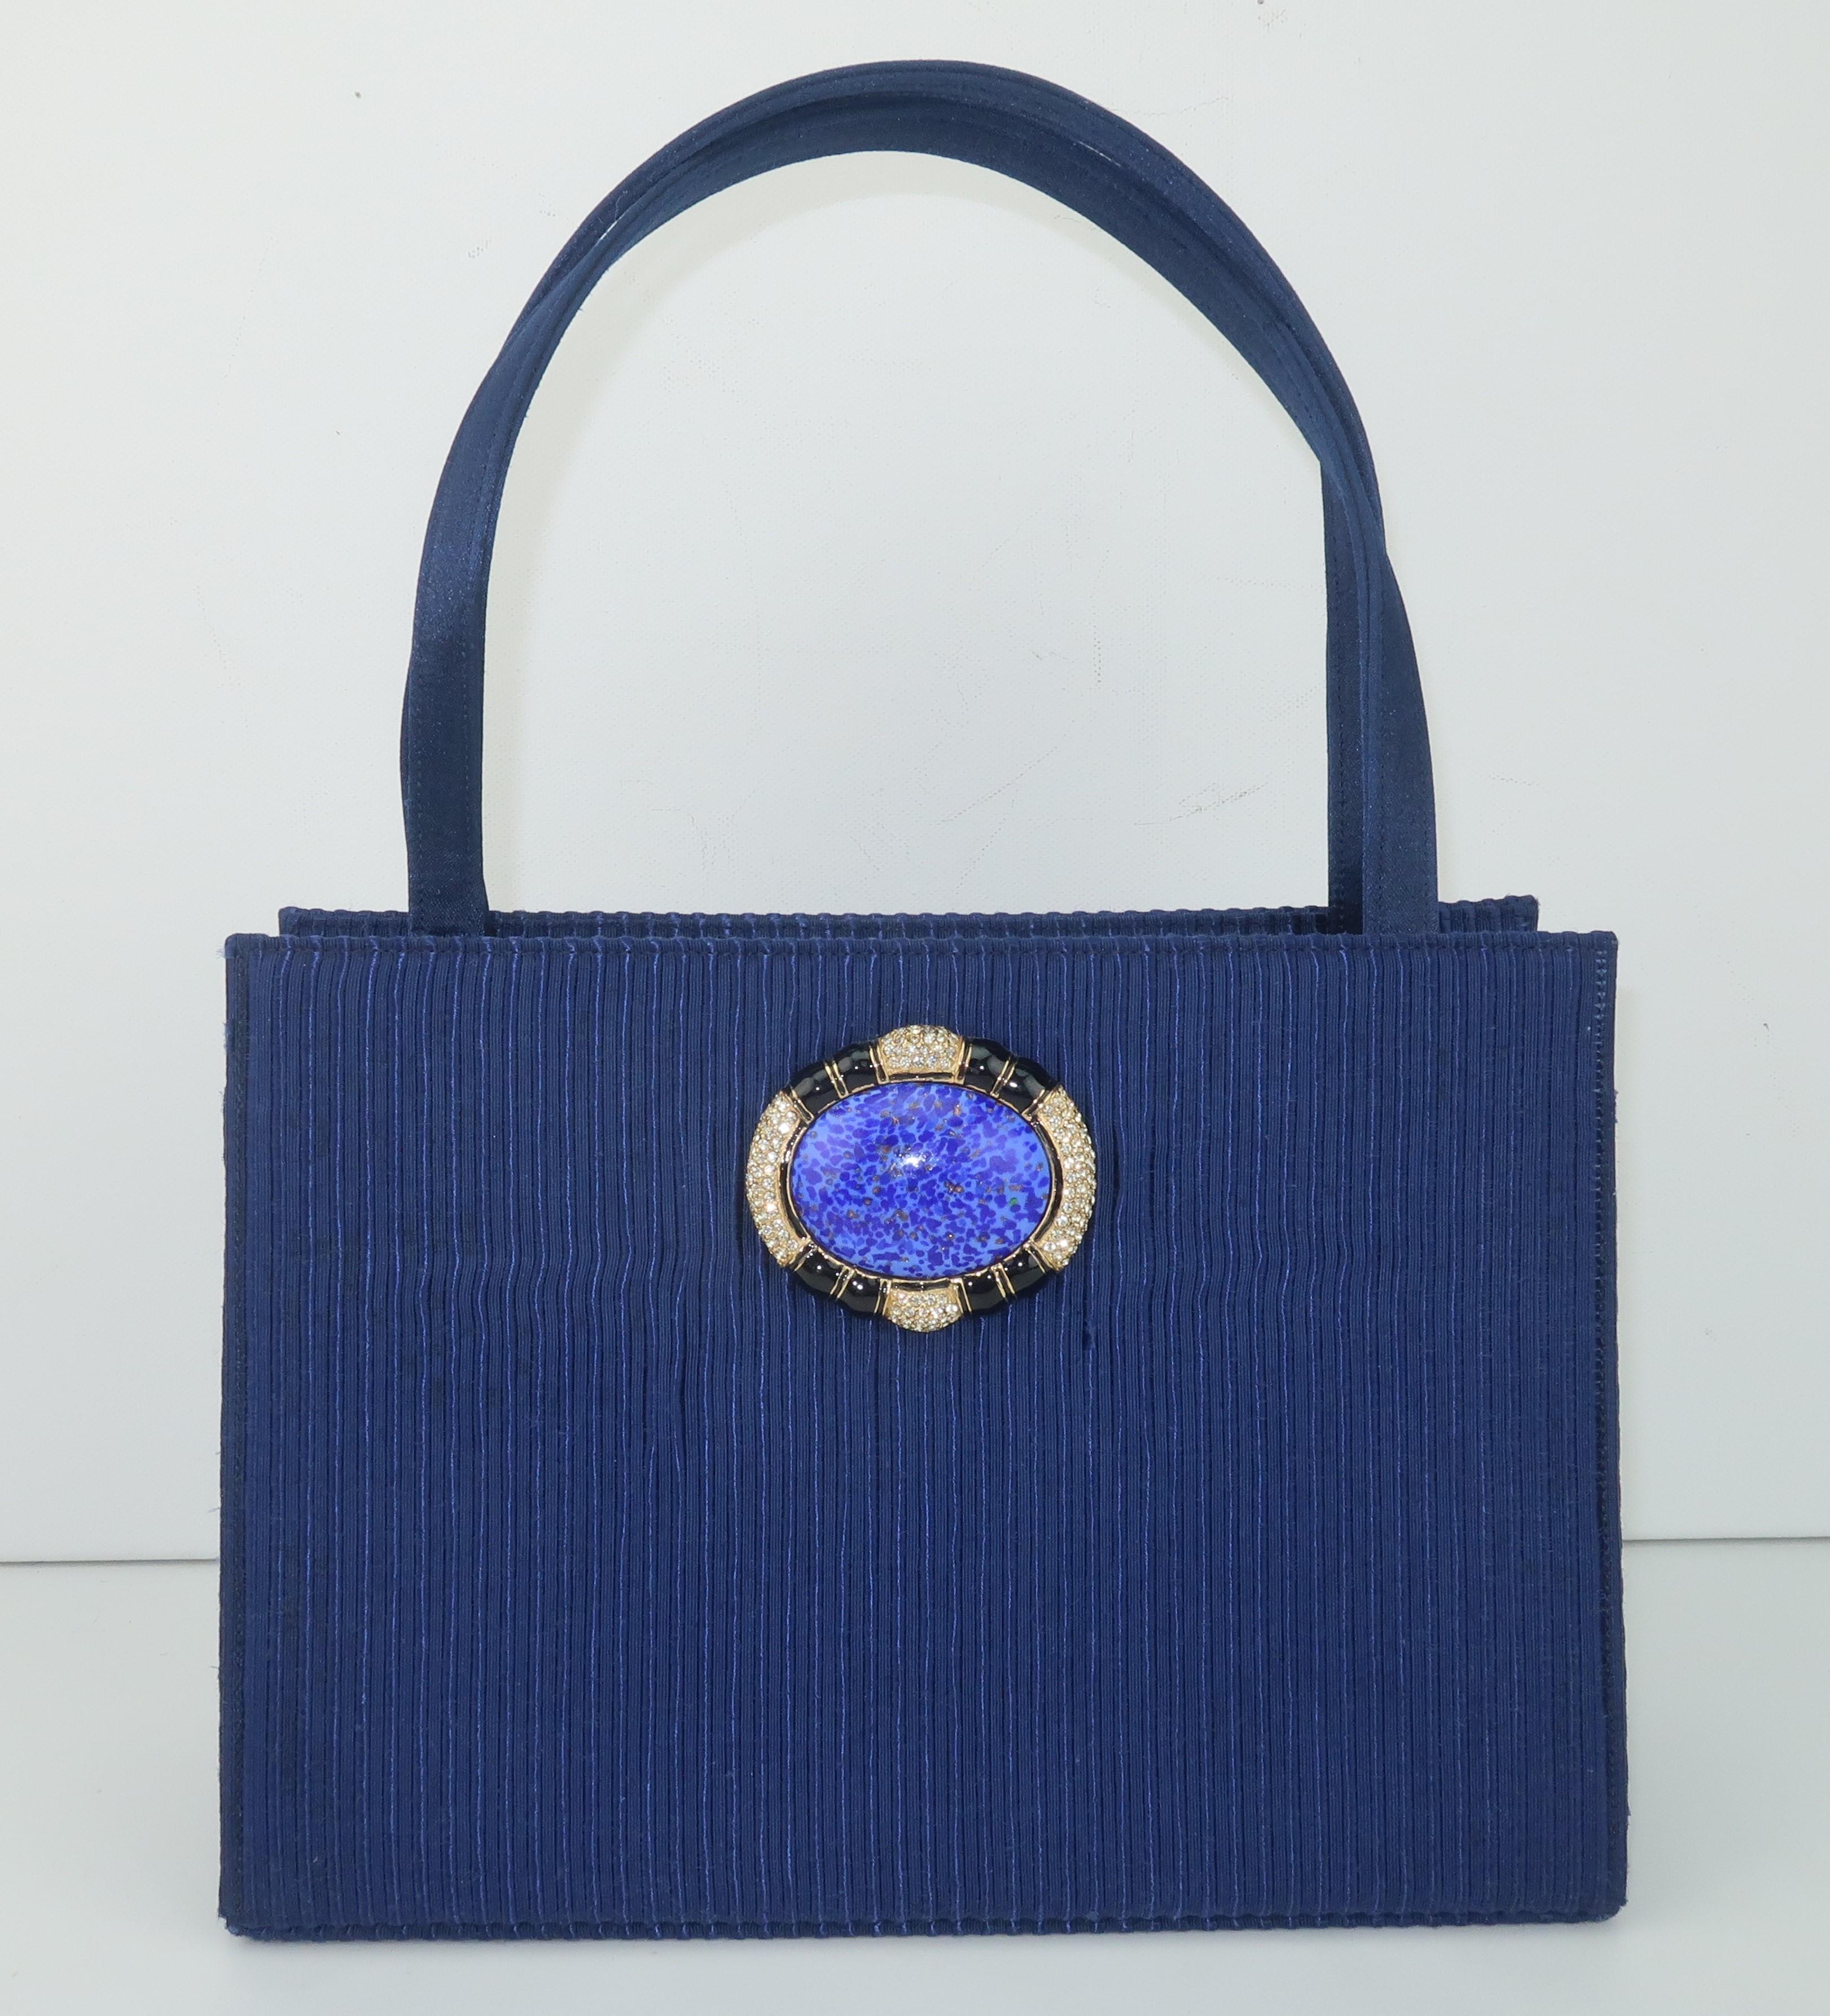 It's a Schaak attack!  A fabulous Martin Van Schaak dark royal blue fabric top handle handbag with a glass medallion decoration is on the prowl just waiting to add a dash of vintage glamour to your wardrobe.  Mr. Van Schaak's handbag designs are